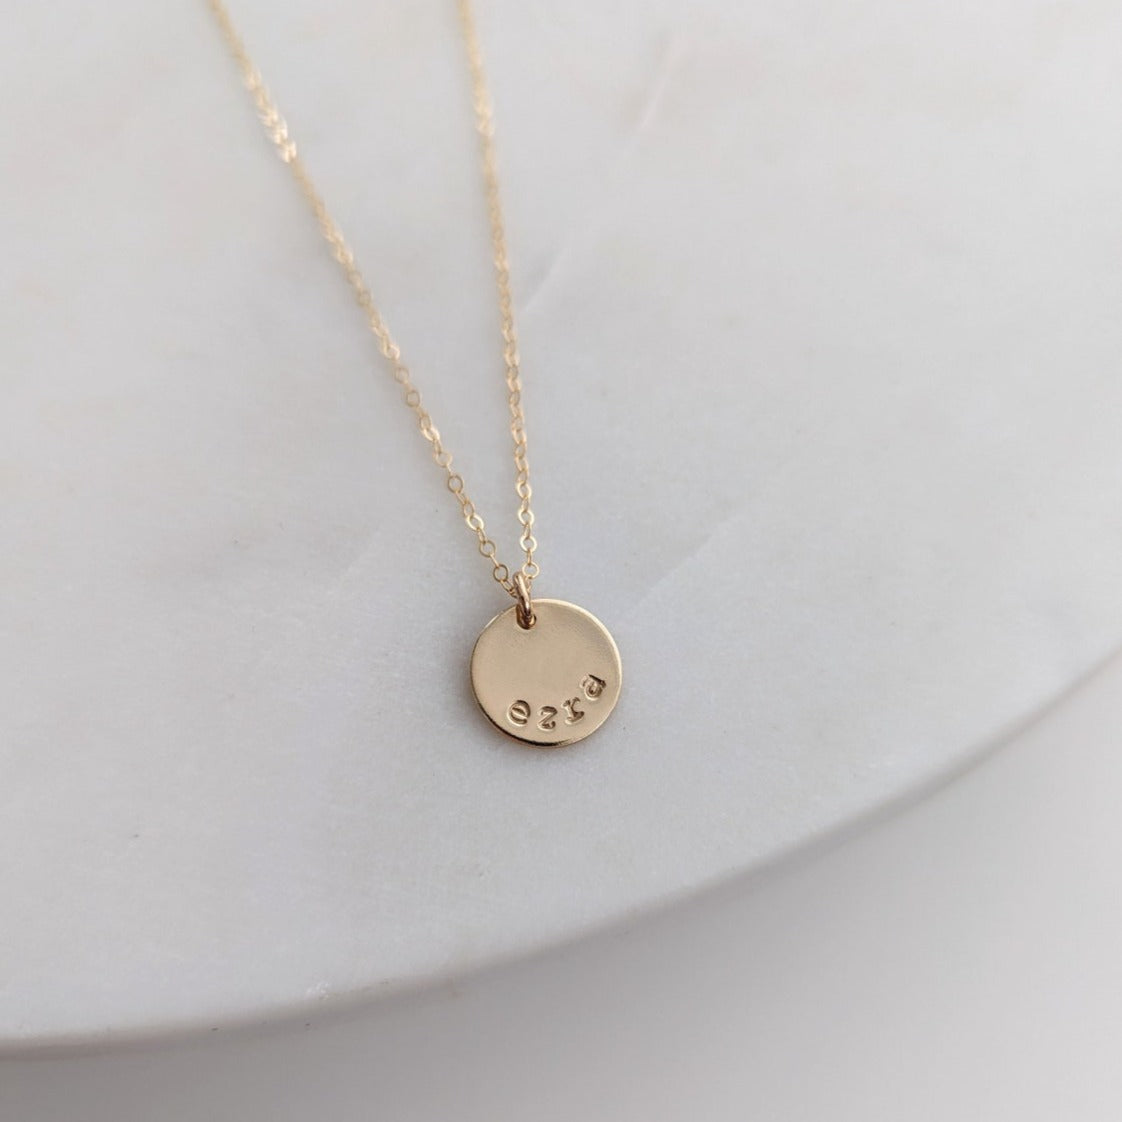 .5" gold filled disc necklace with name on it